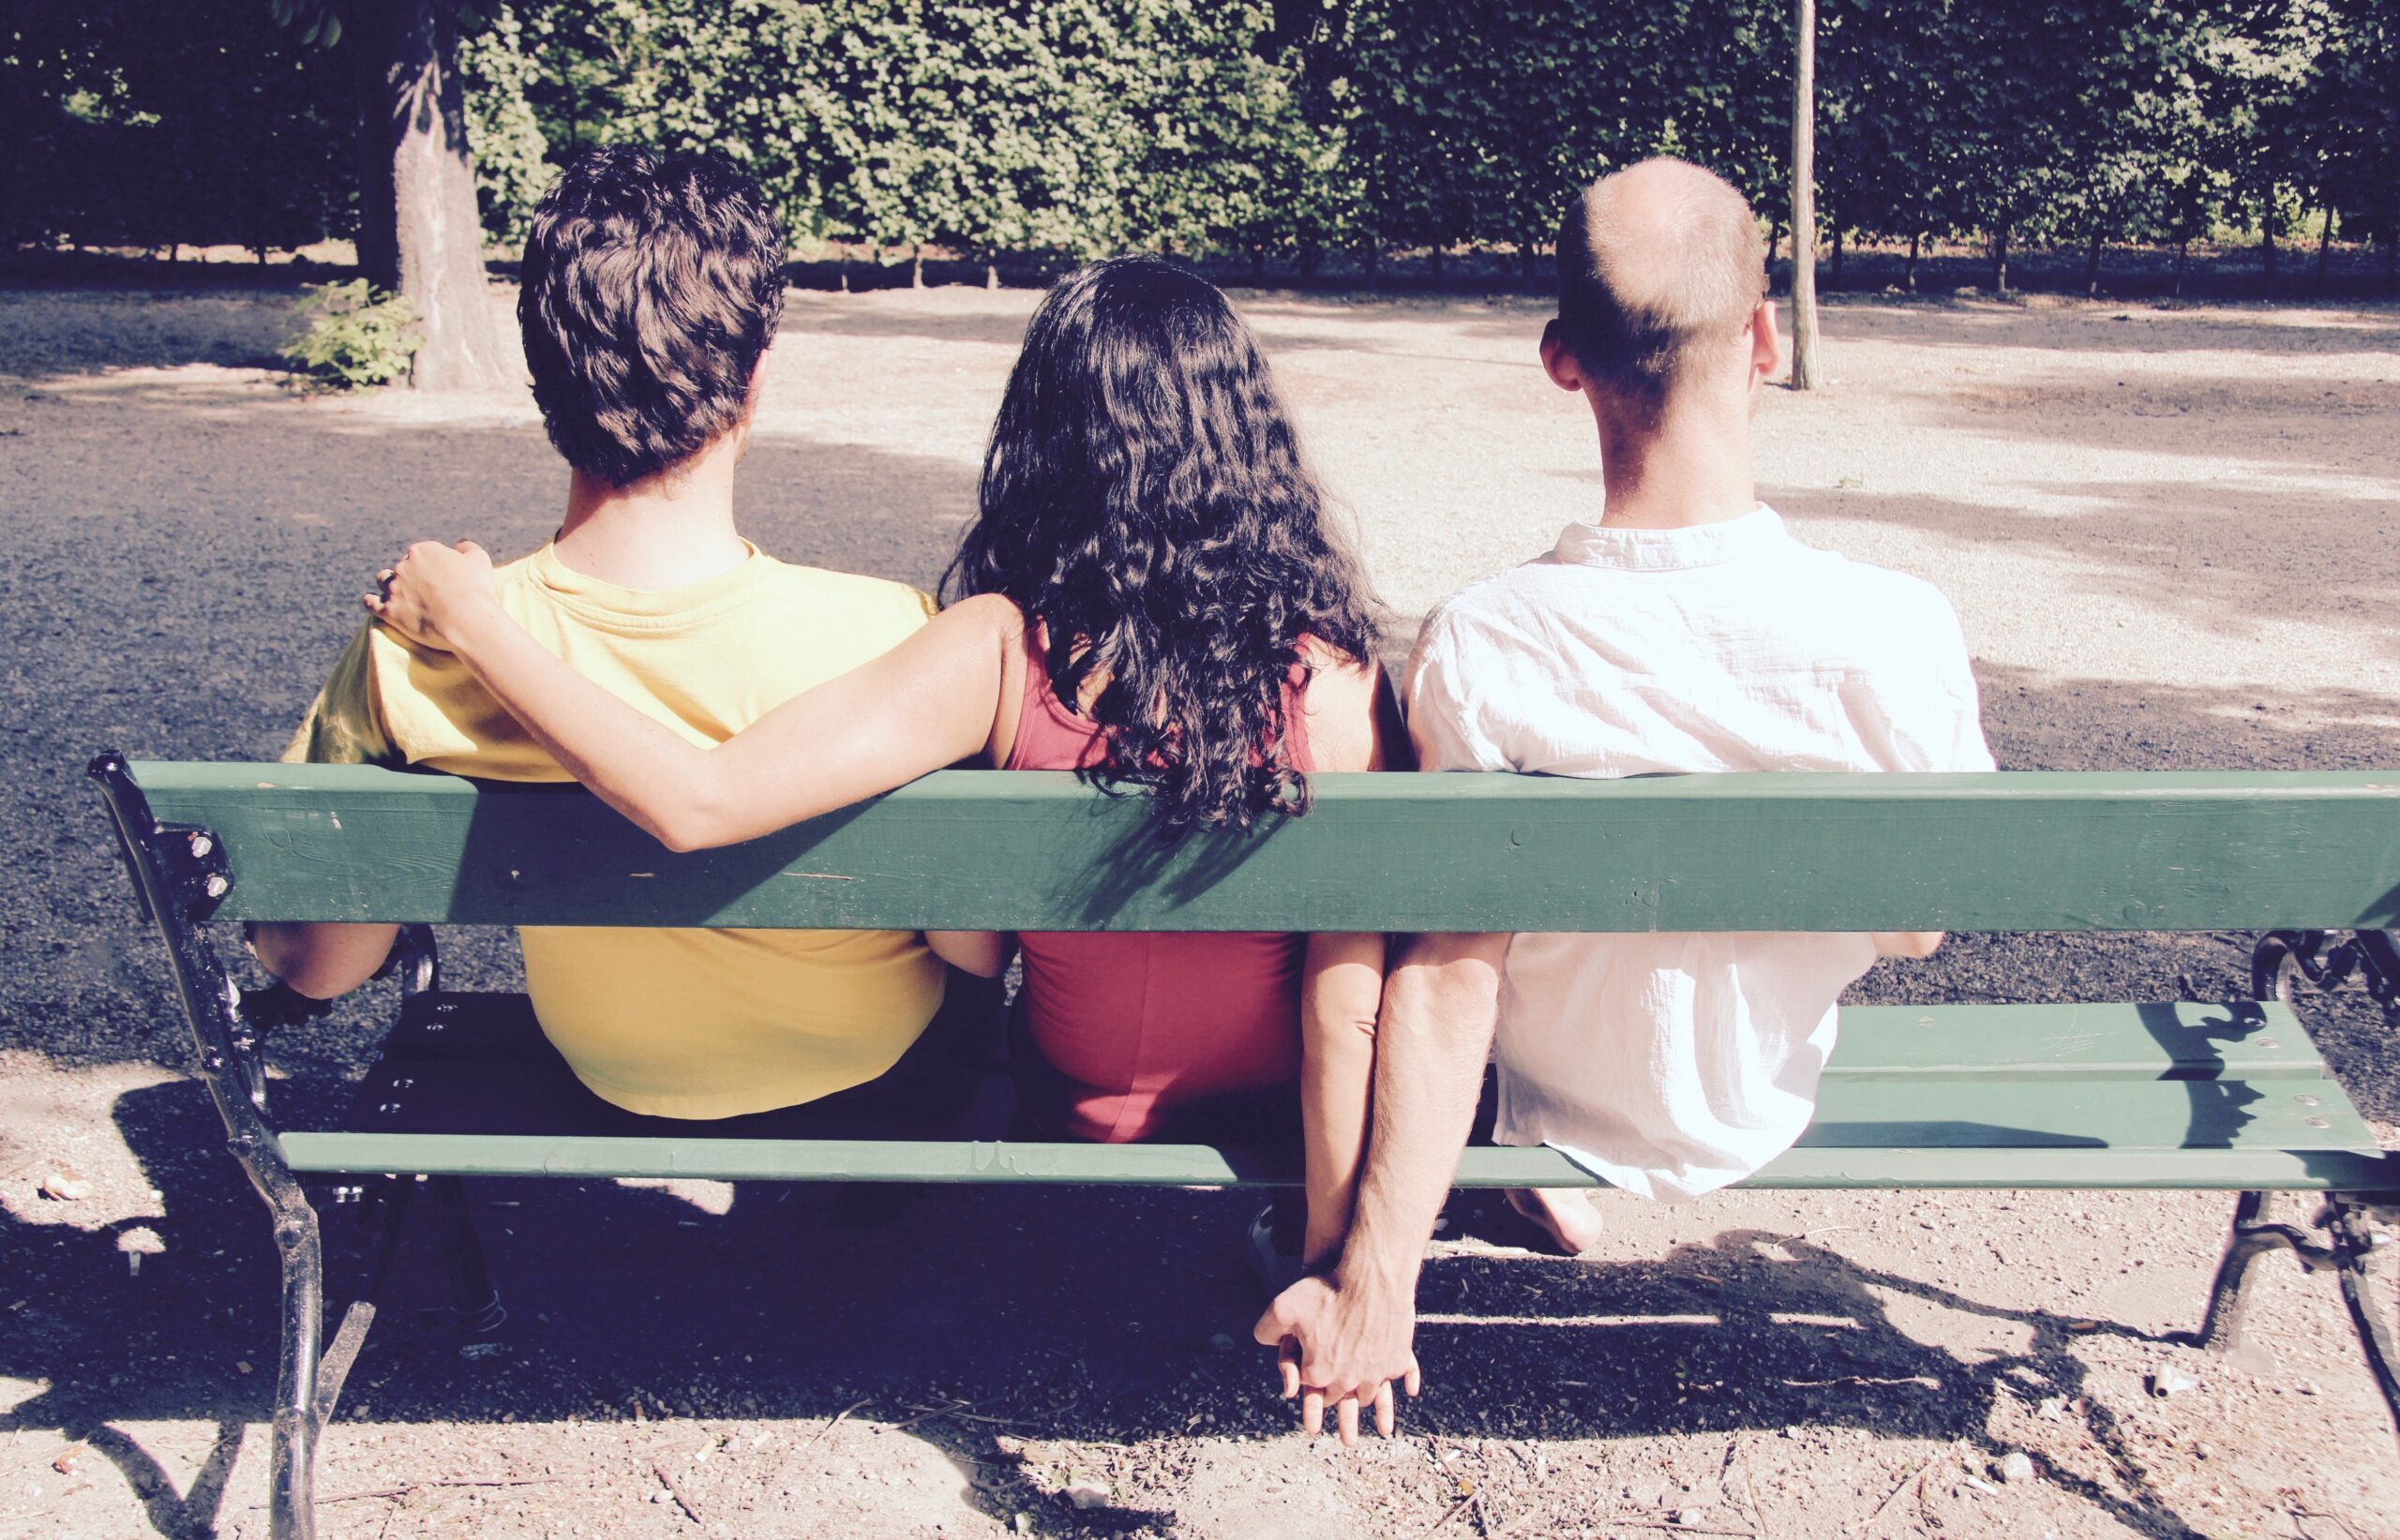 Ethical non-monogamy: What to know about these often misunderstood relationships